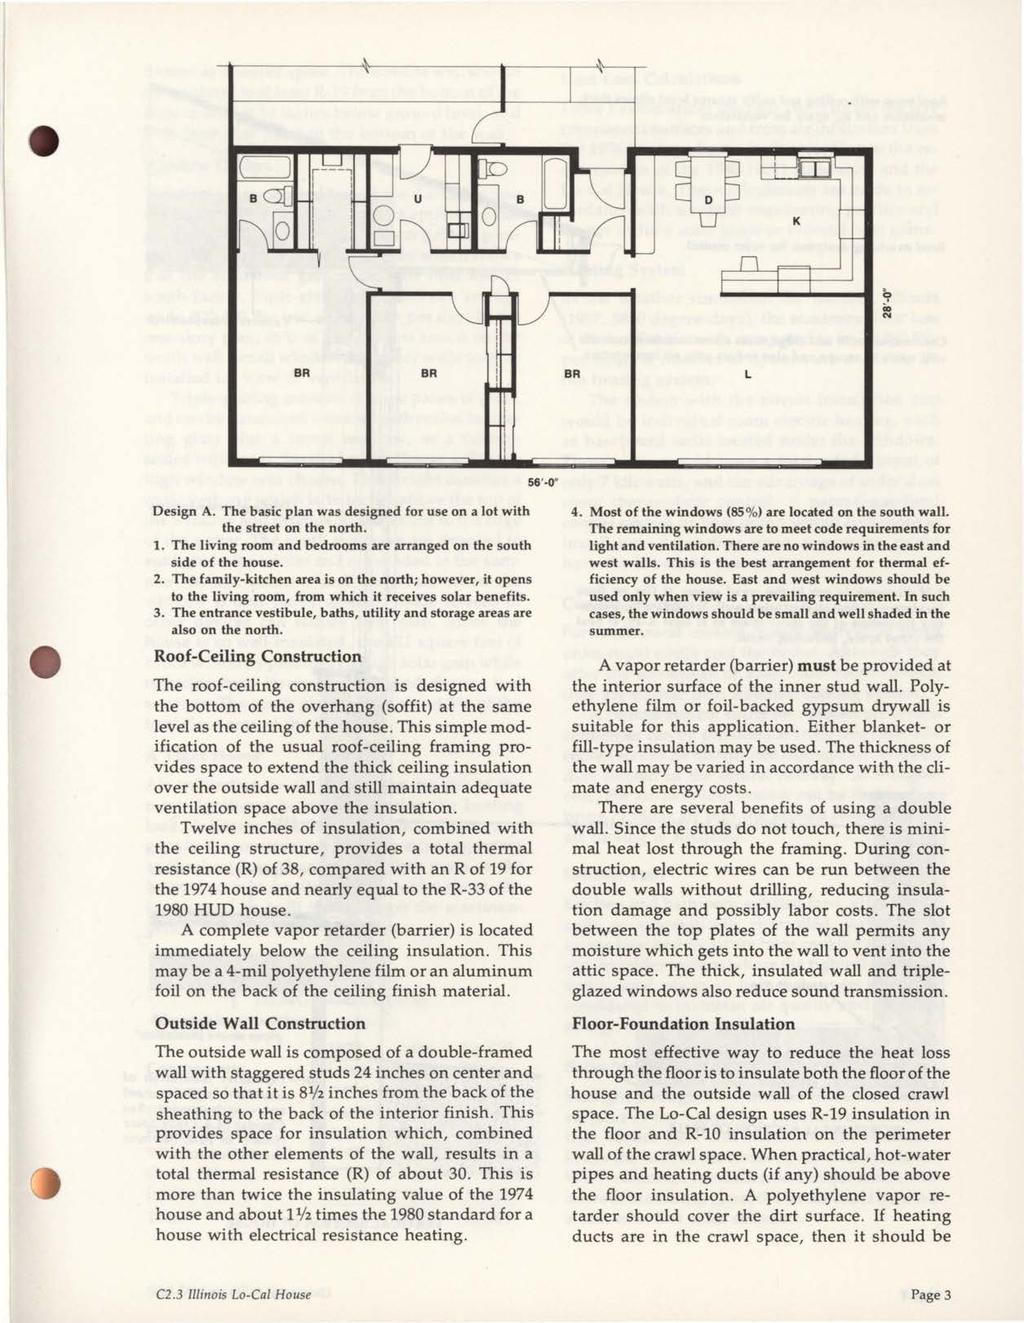 BR BR L 56'-0" Design A. The basic plan was designed for use on a lot with the street on the north. 1. The living room and bedrooms are arranged on the south side of the house. 2.